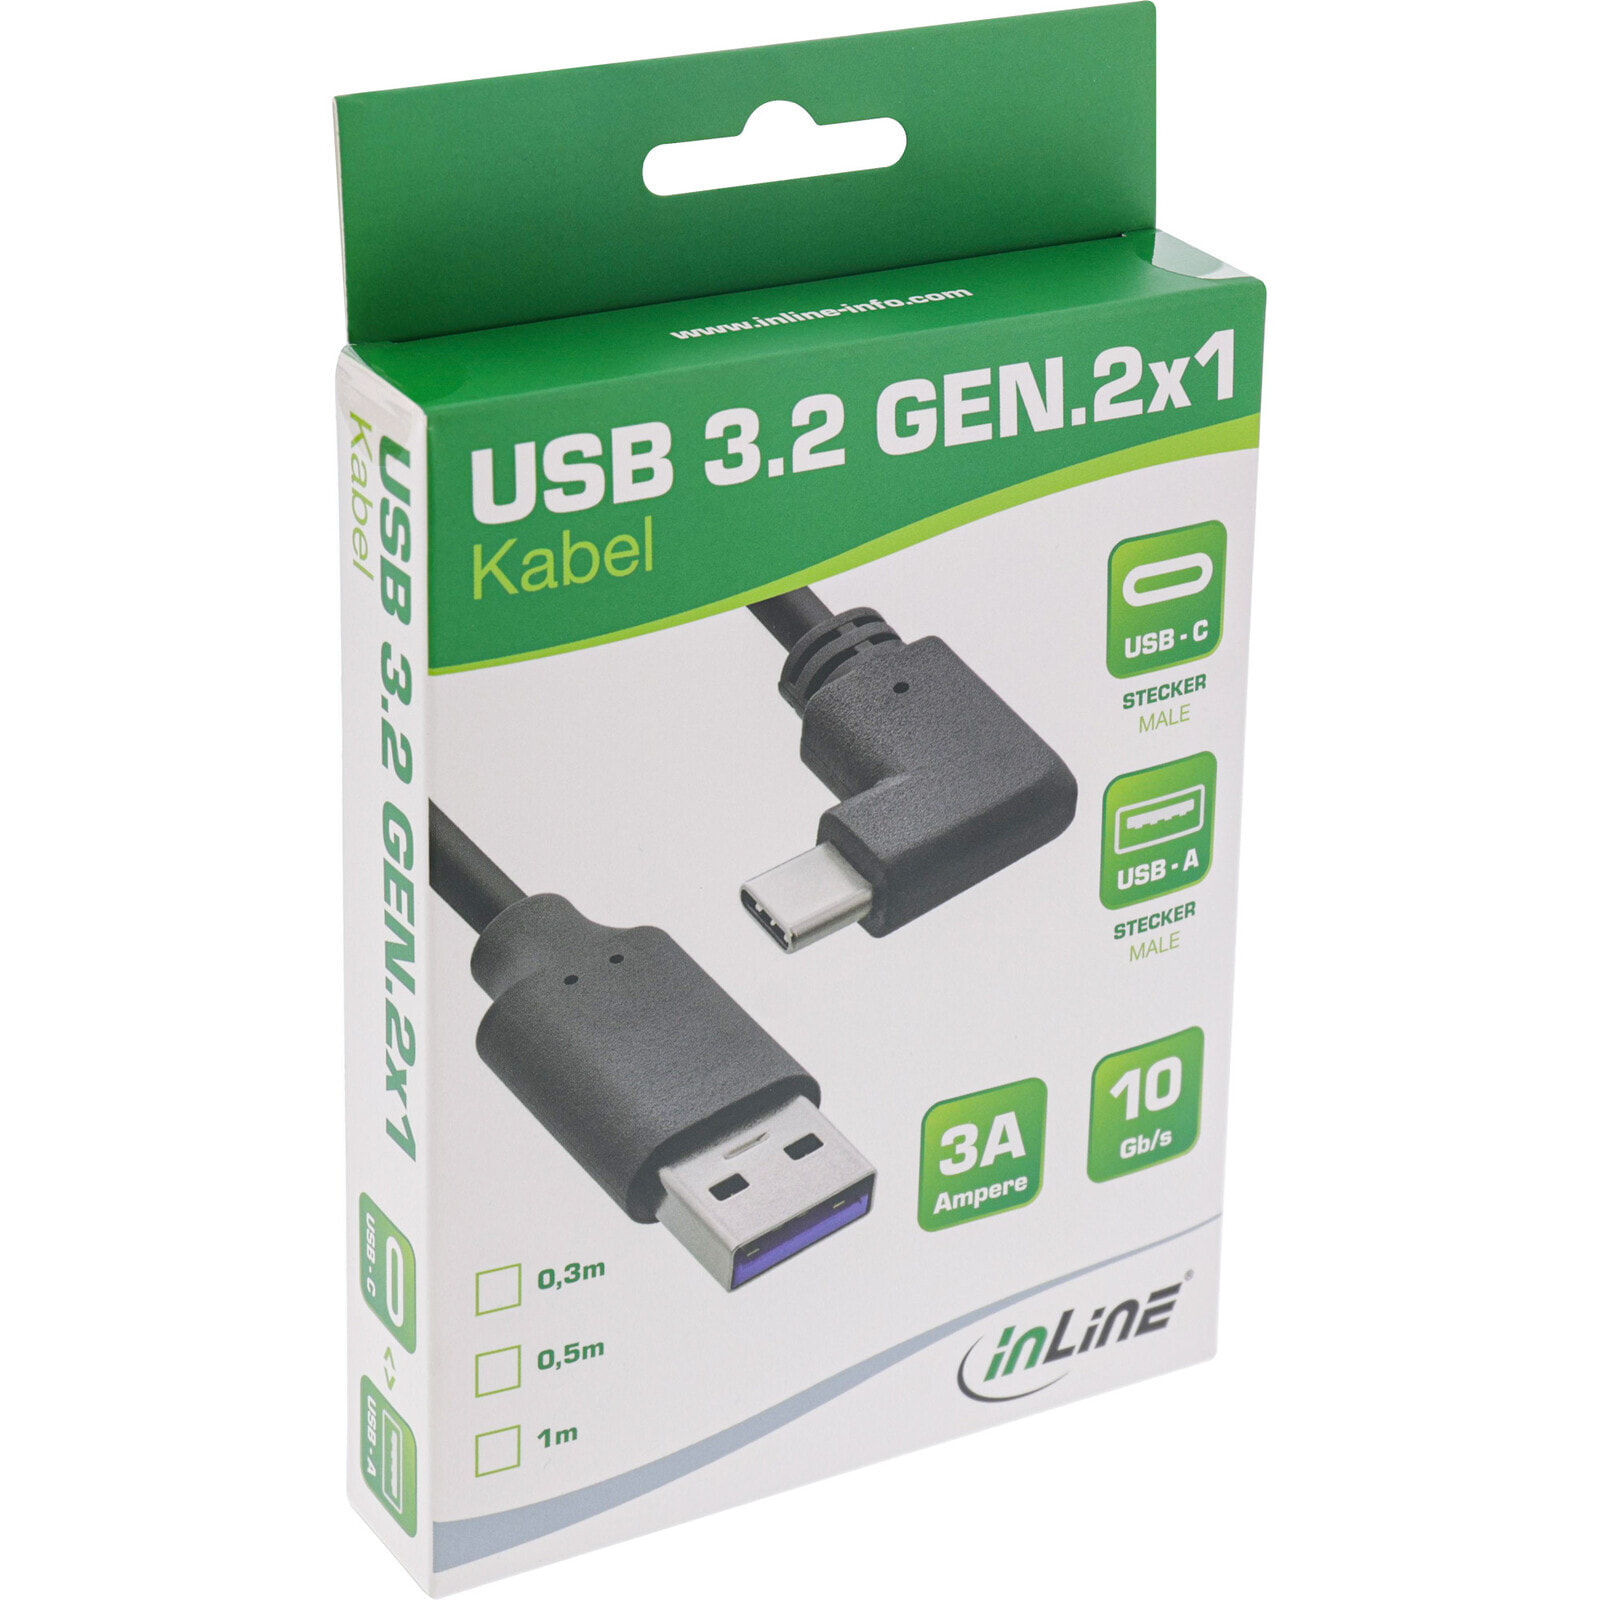 USB 3.2 cable - USB-C male angled to USB-A male - black - 1m